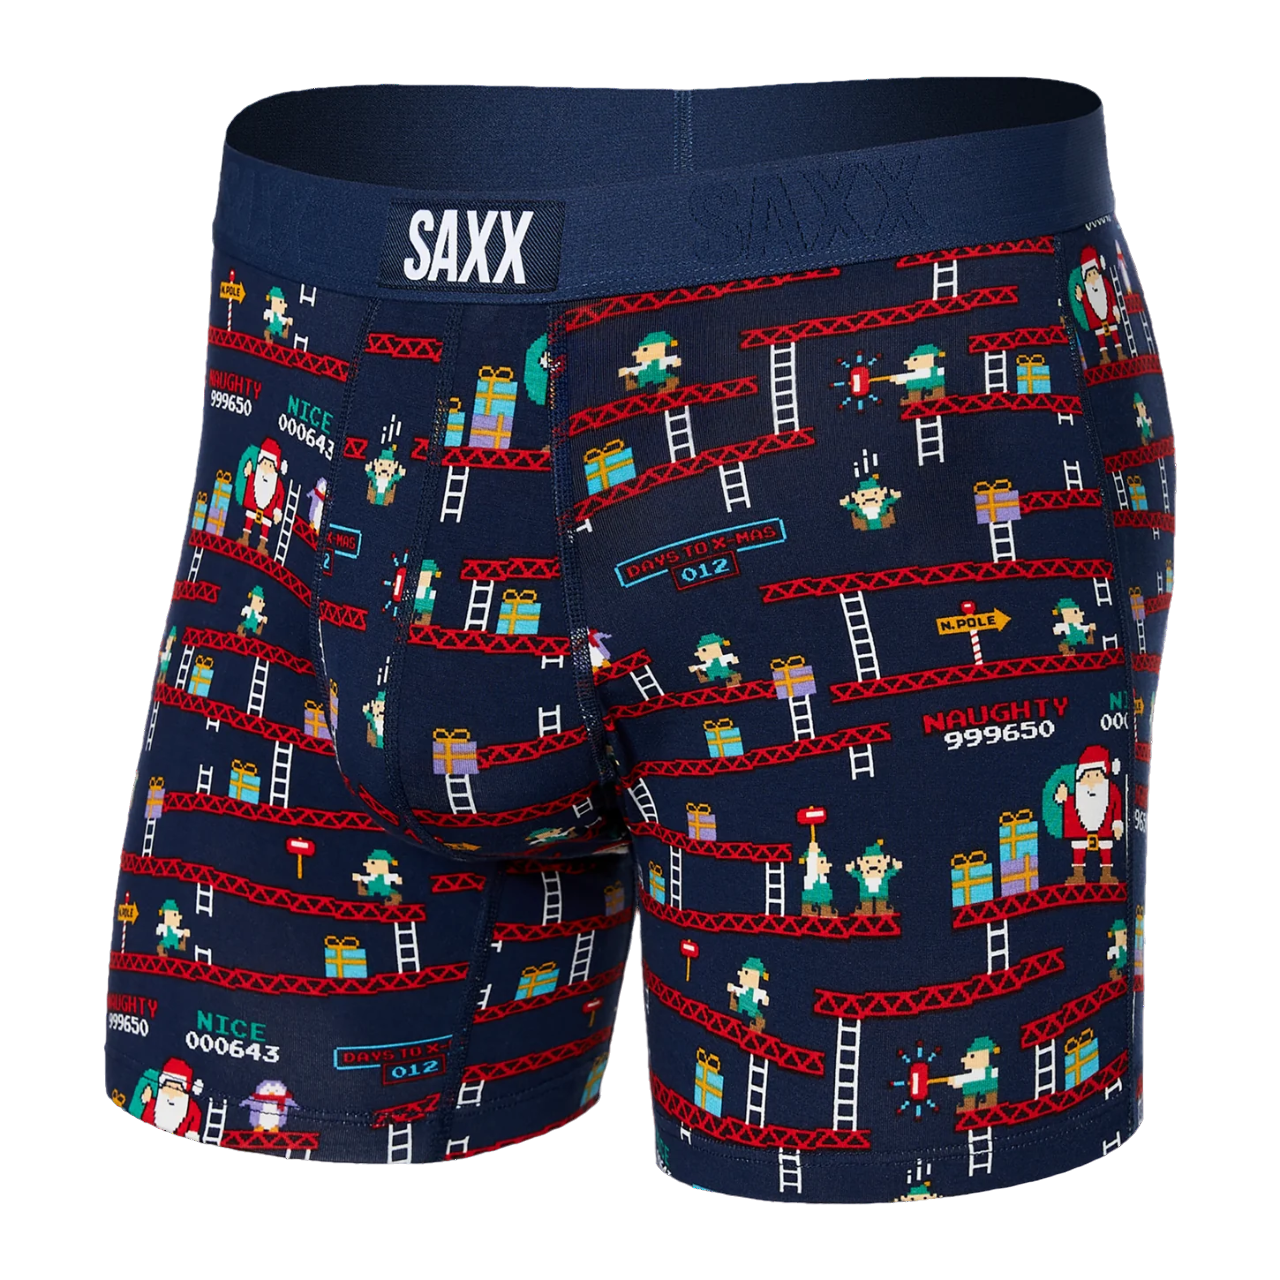 Saxx Ultra Boxers - Let's Get Toasted - Black